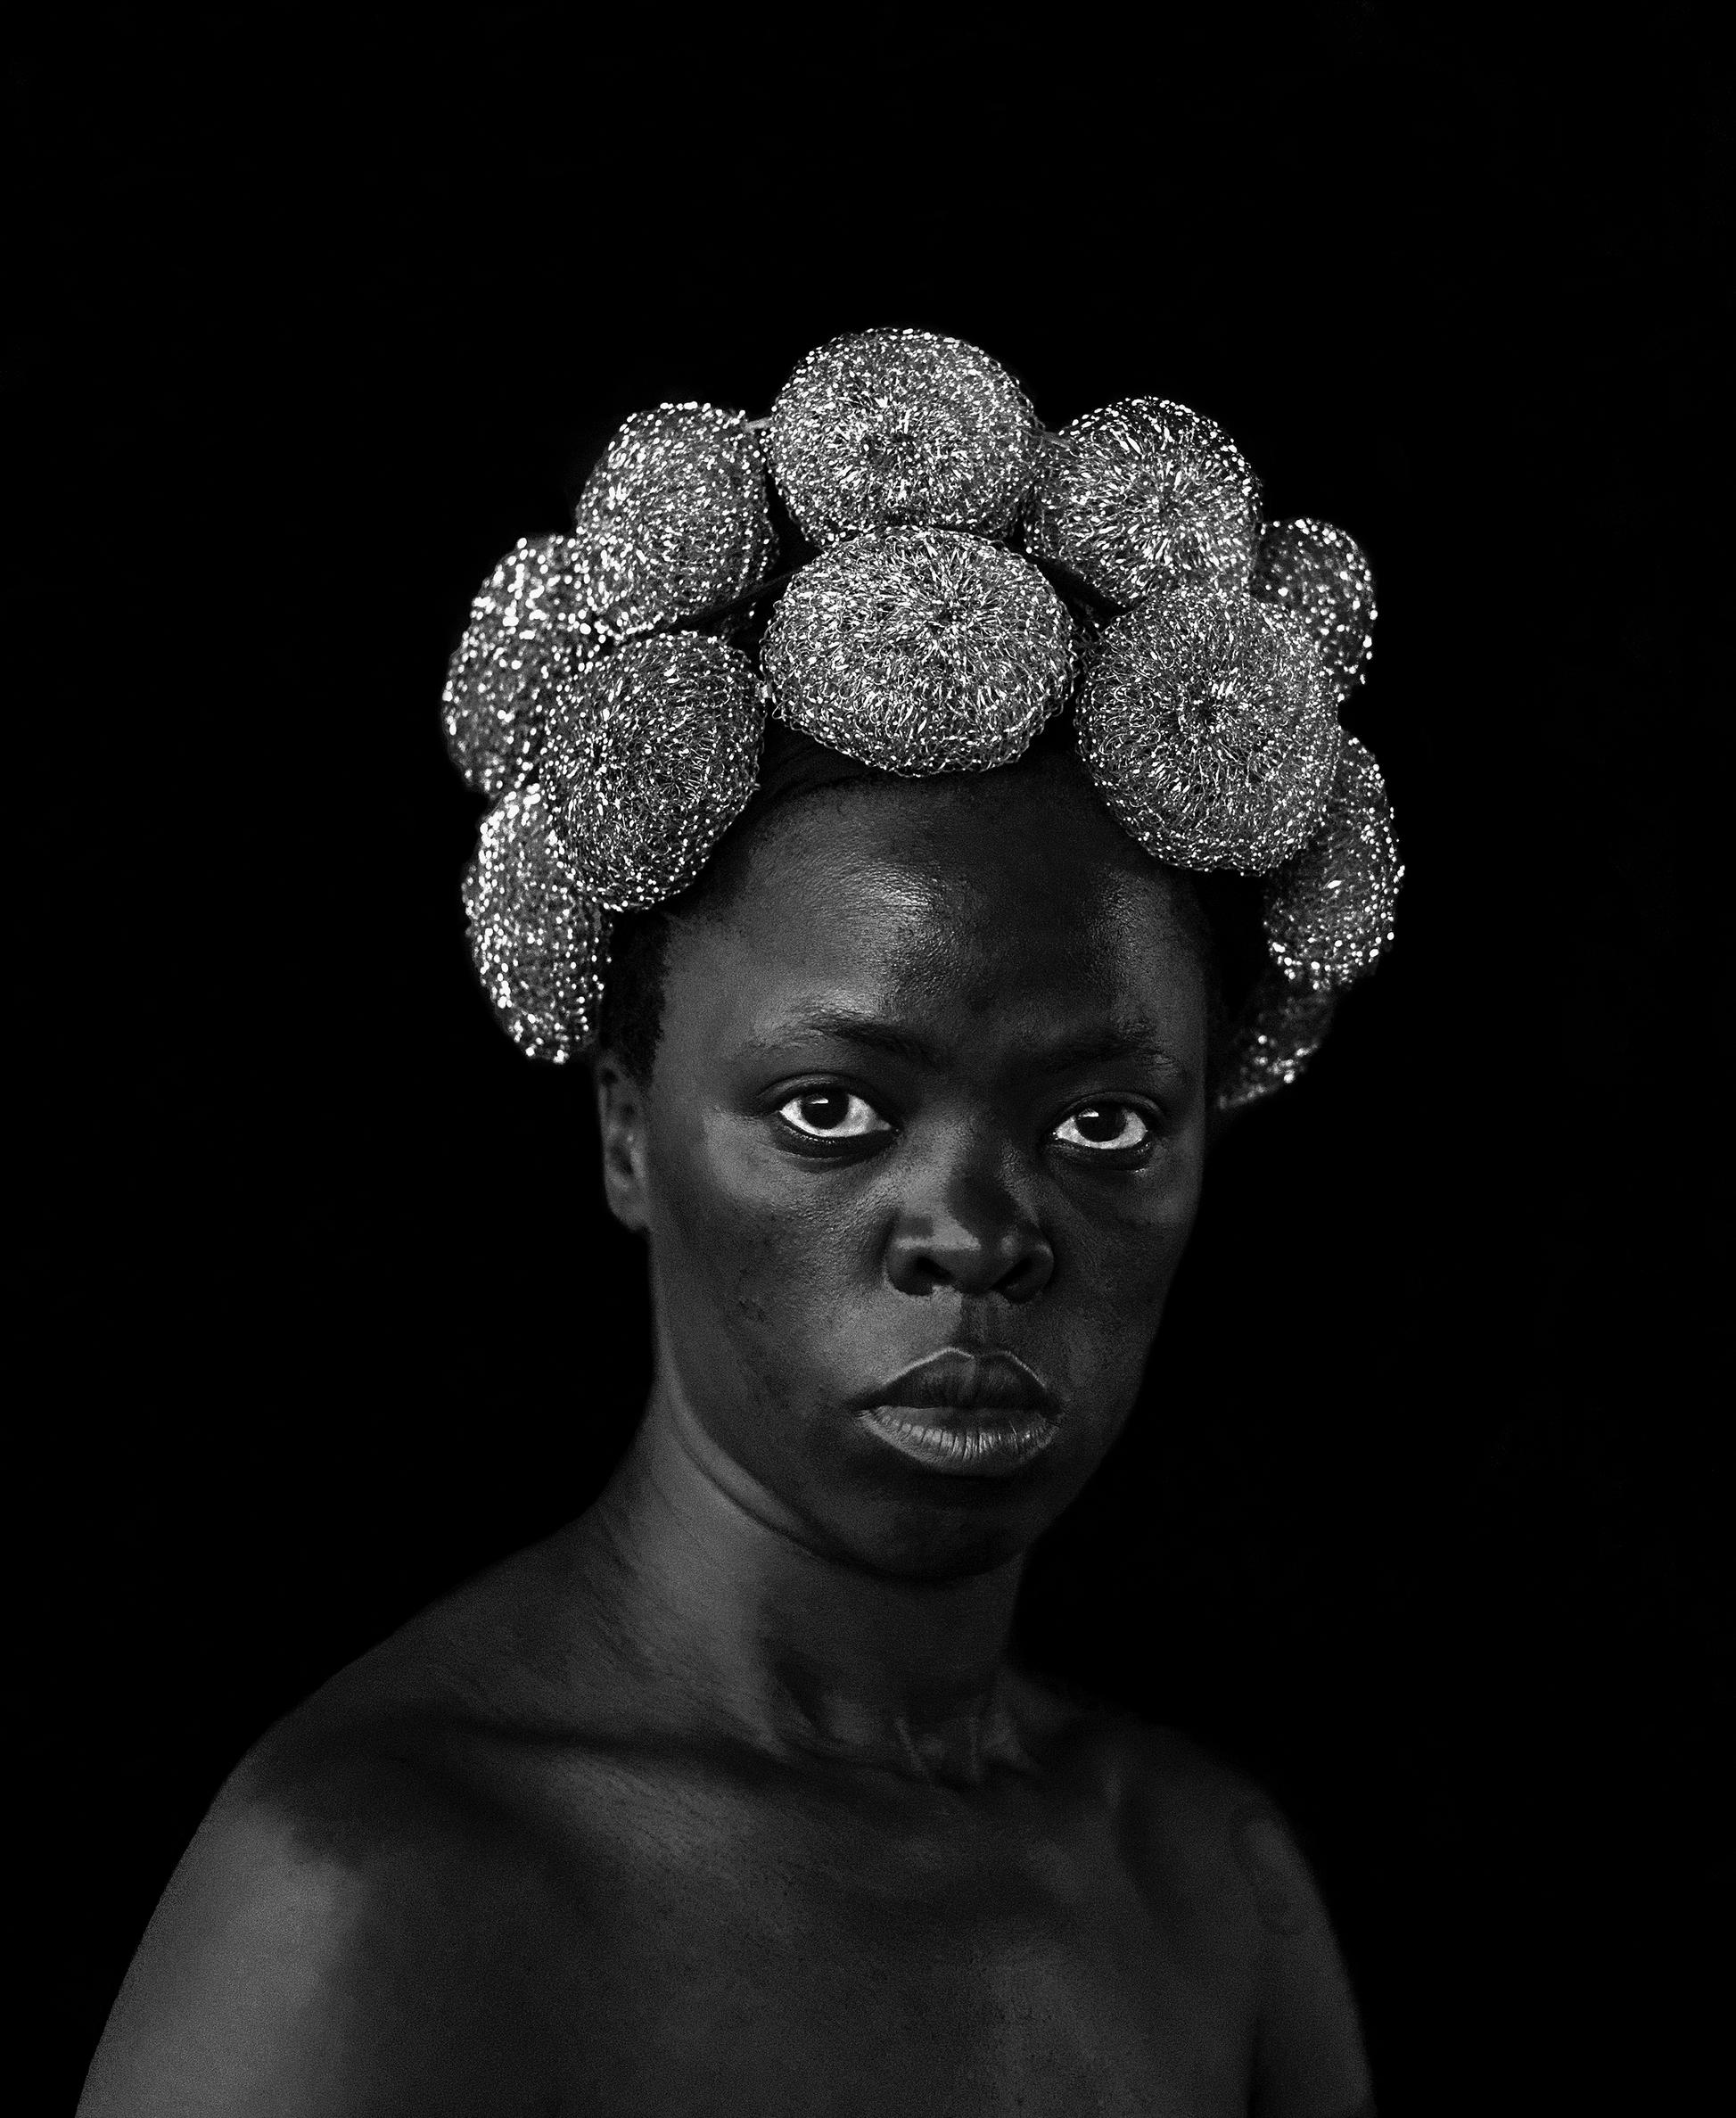 A black and white image of a person with a crown of circular flowers surrounding their hair.